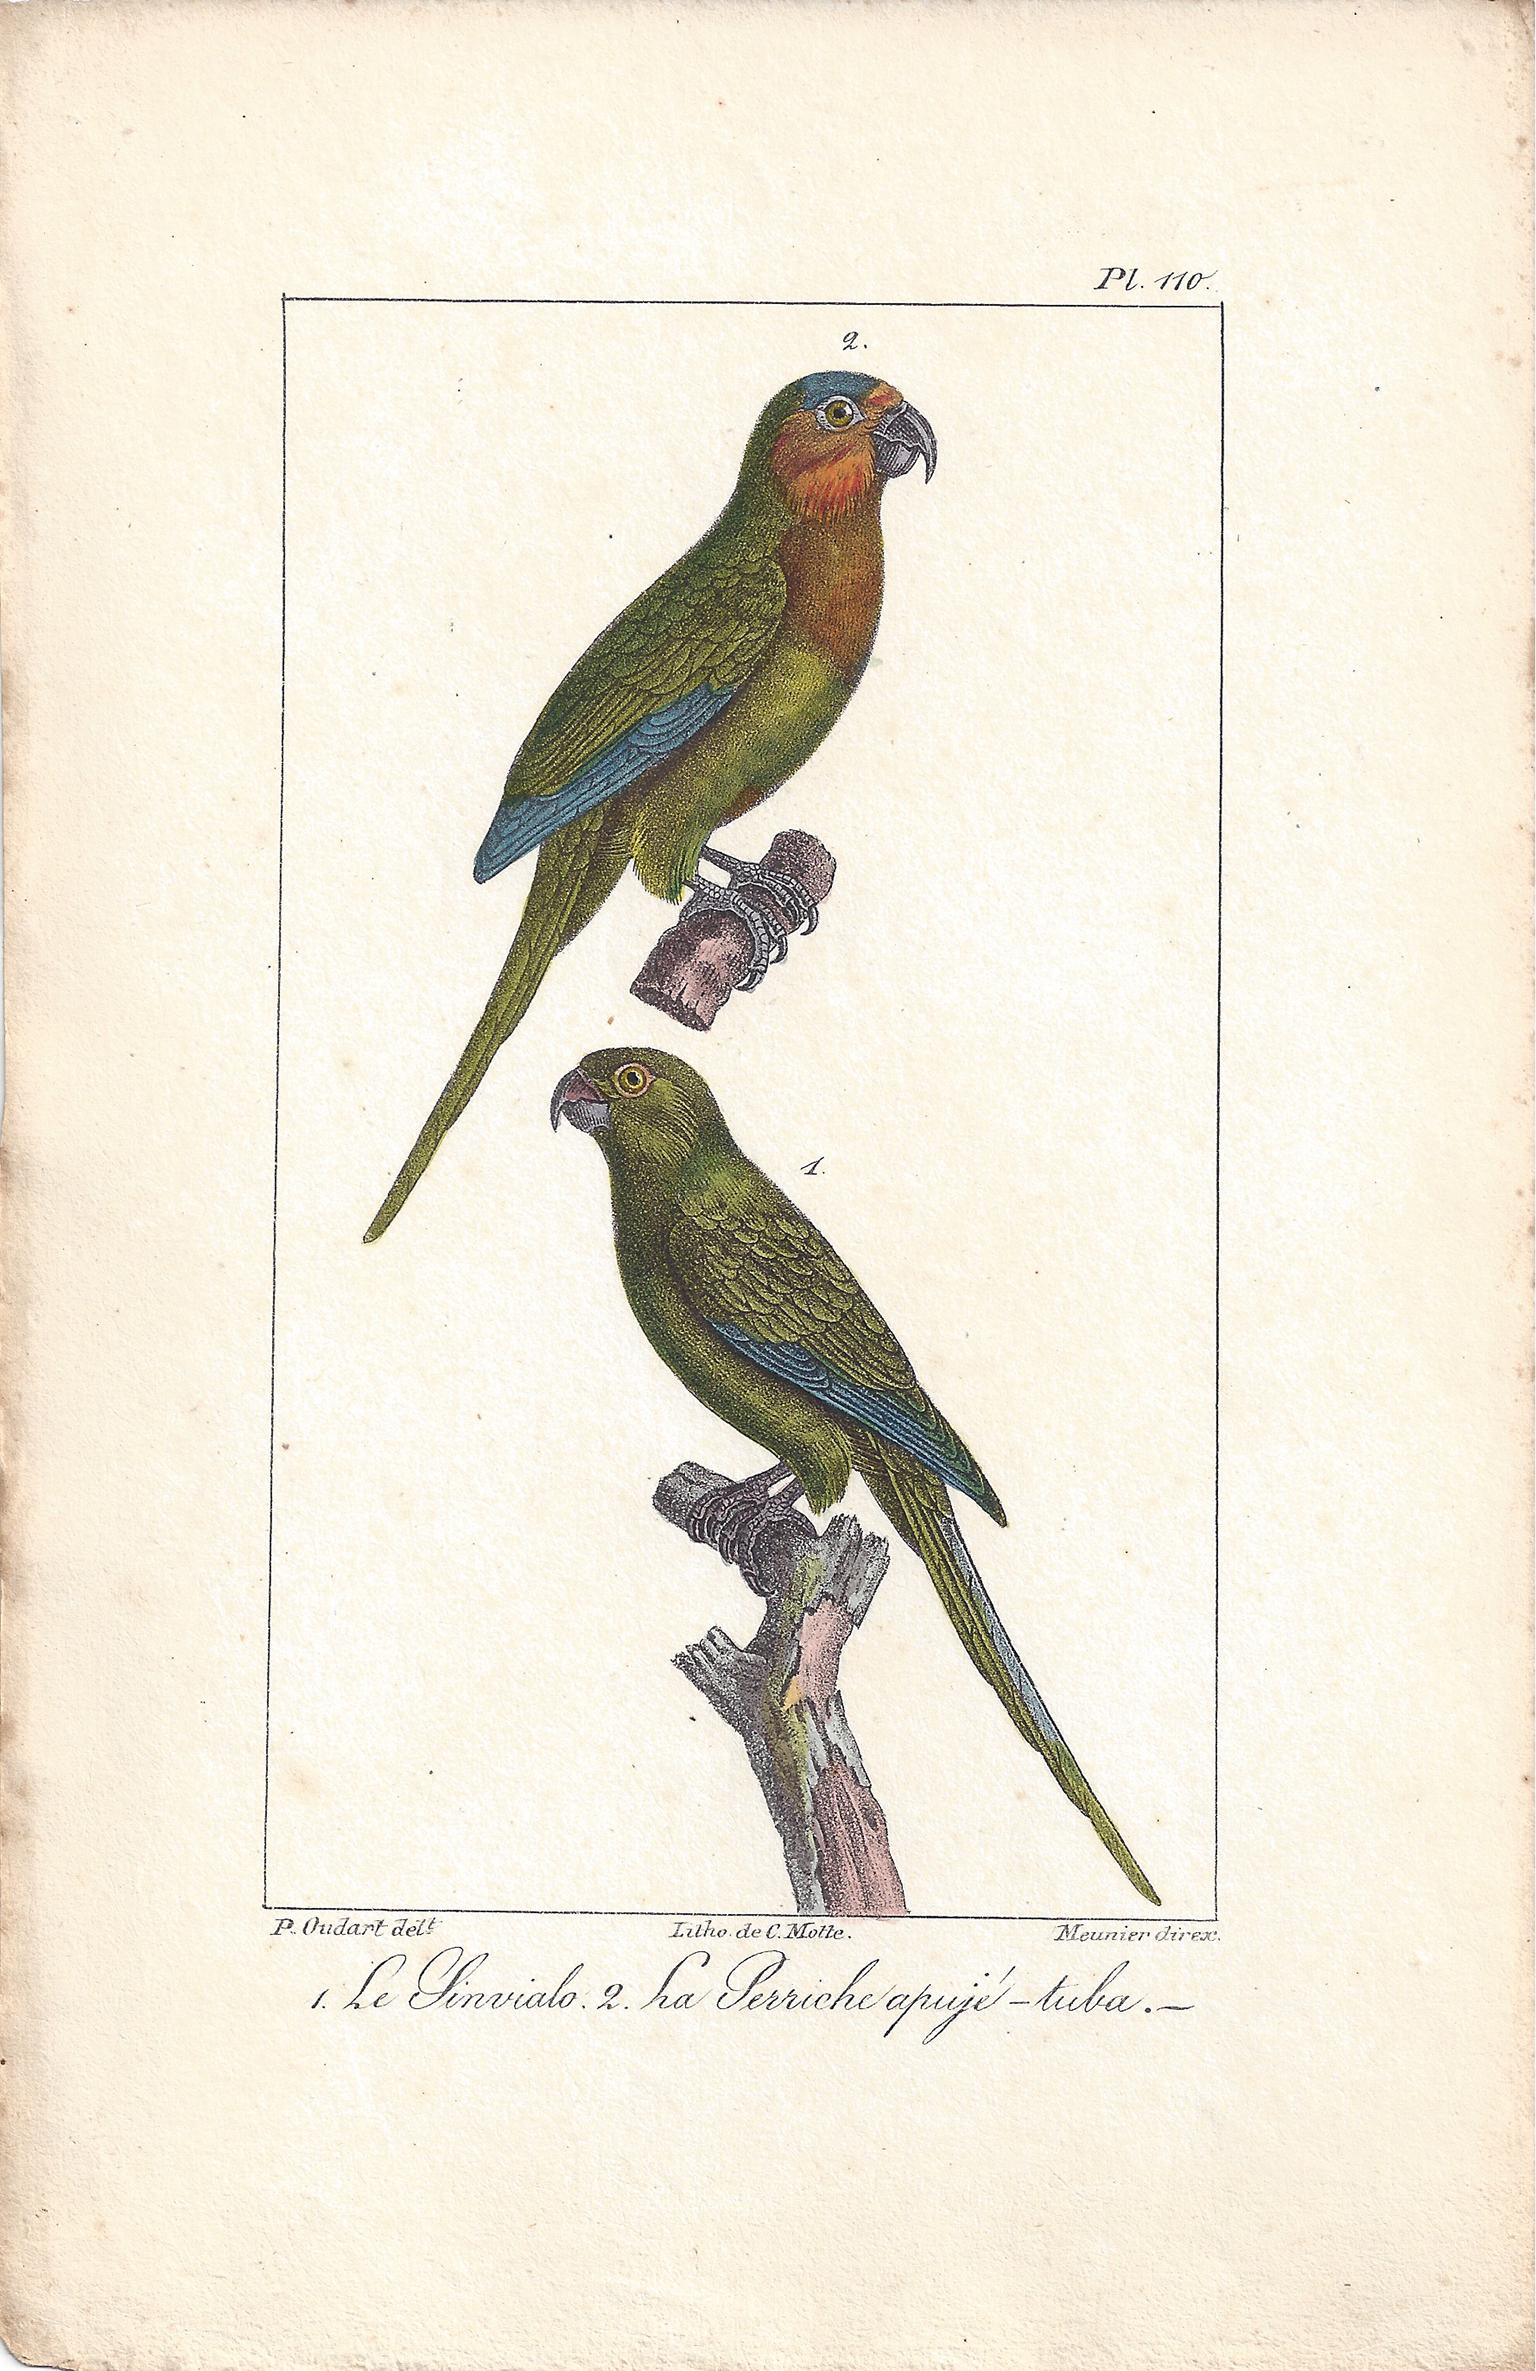 Charles Motte Animal Print - Parrots, French bird lithograph print, 1832